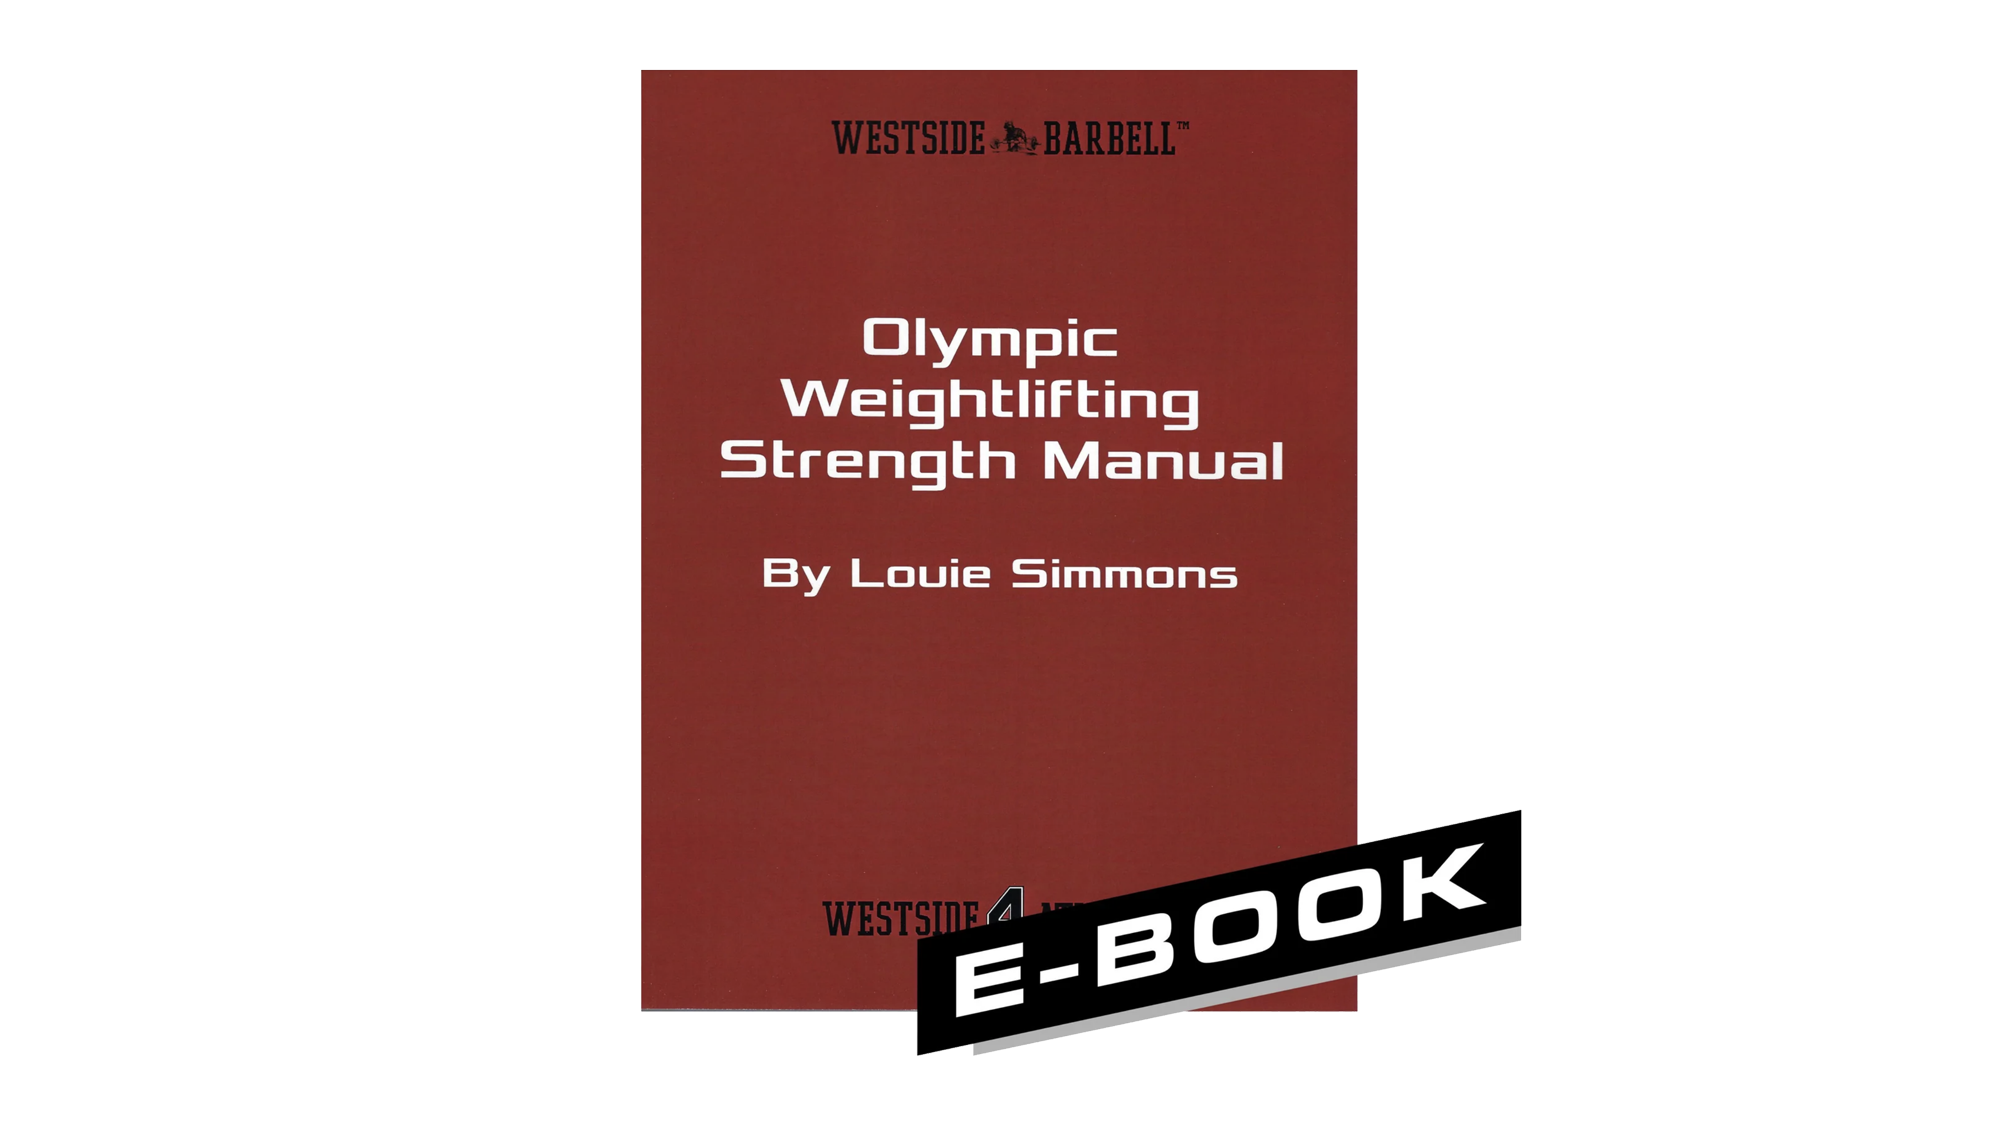 Olympic Weightlifting Strength Manual